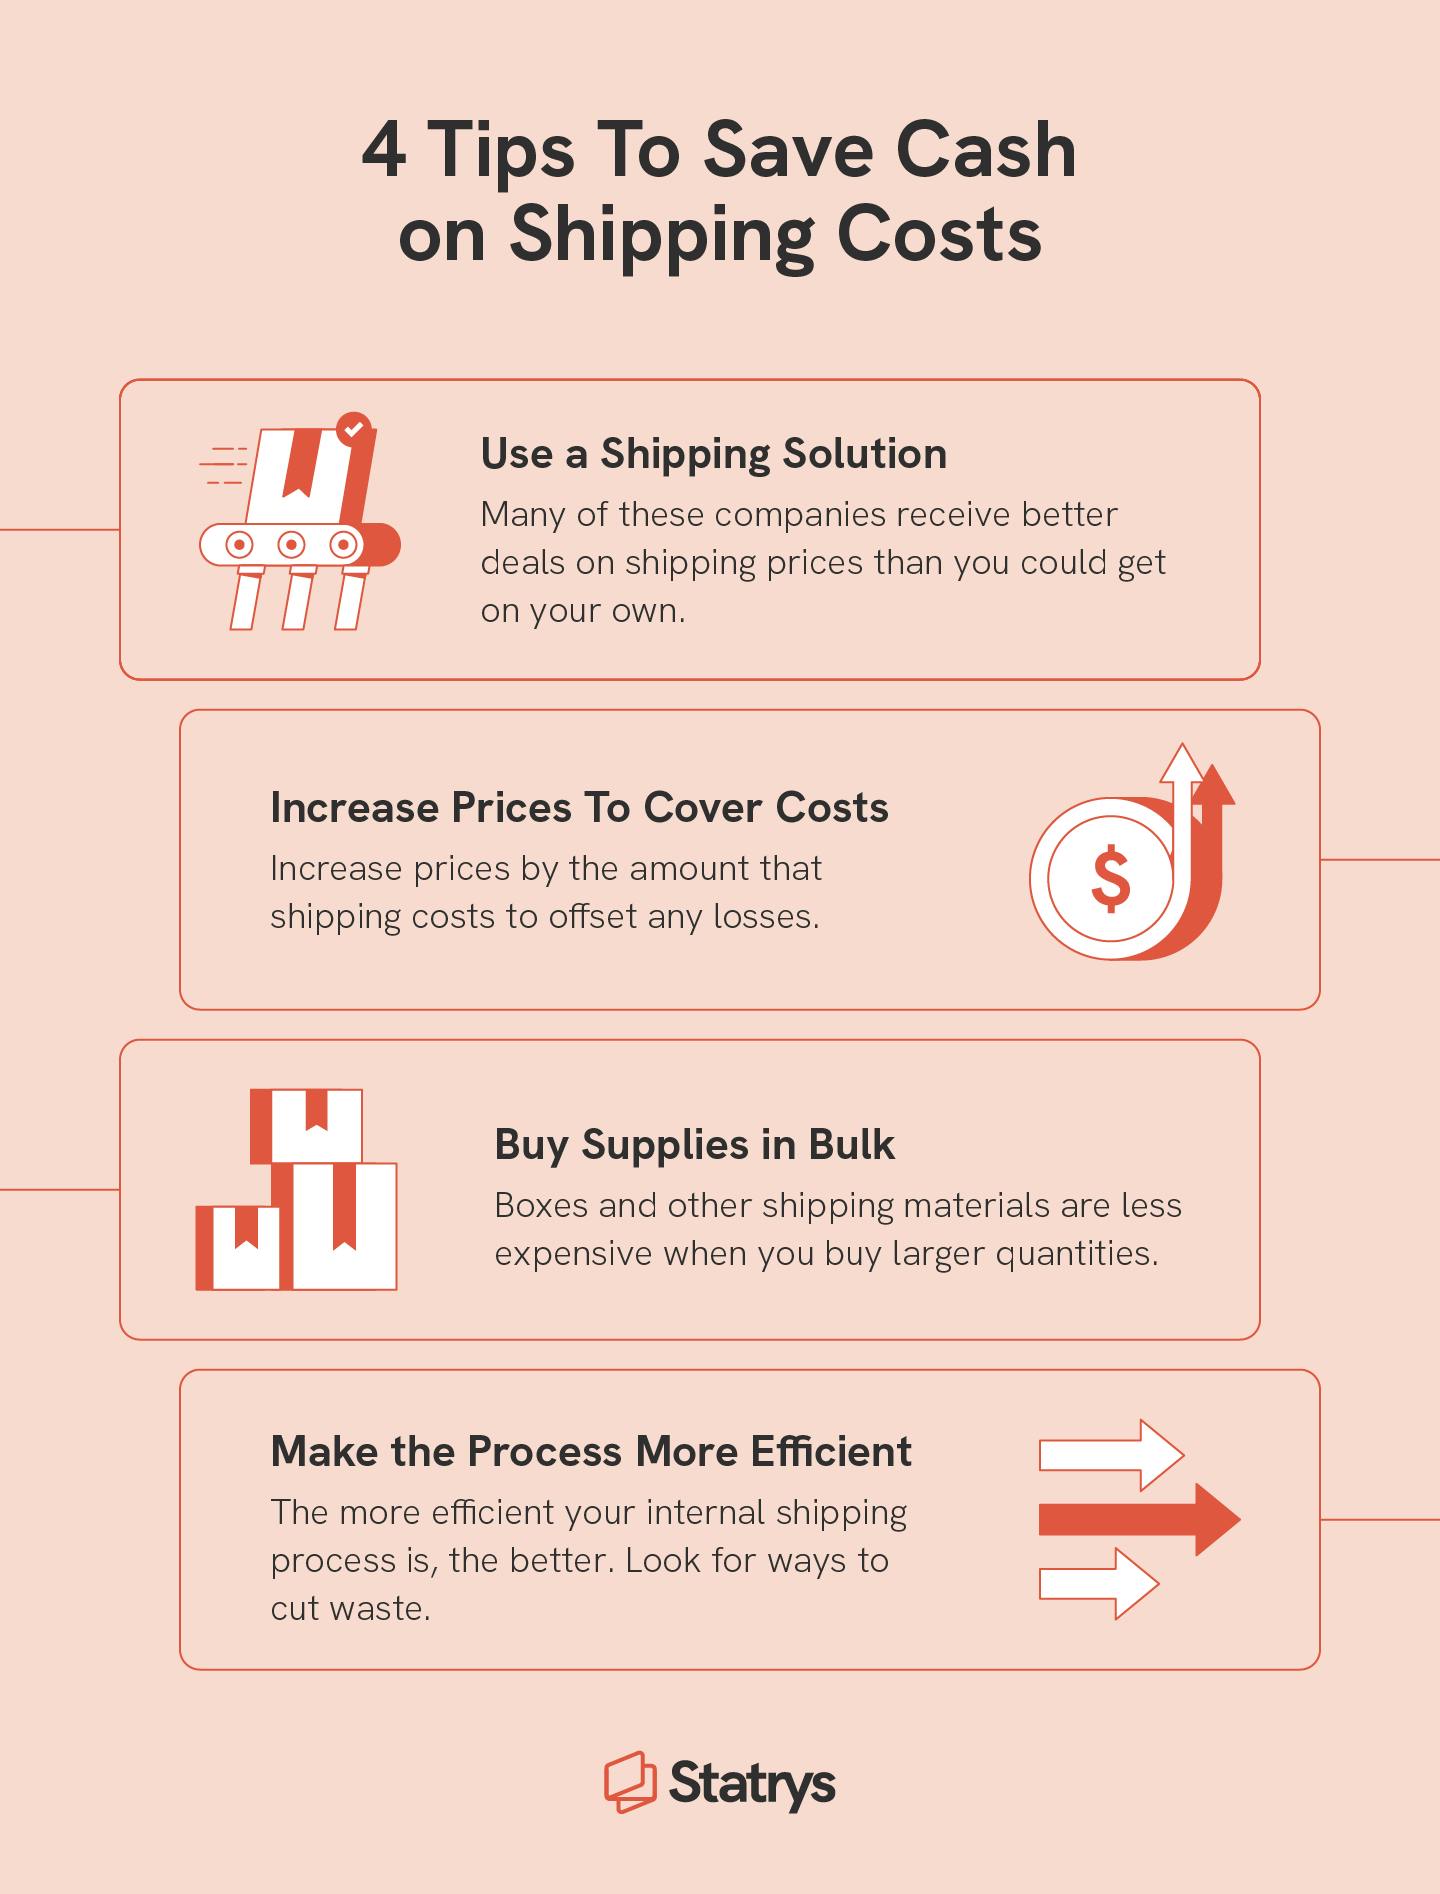 Packaging Materials - Save Money Order Packaging Supplies